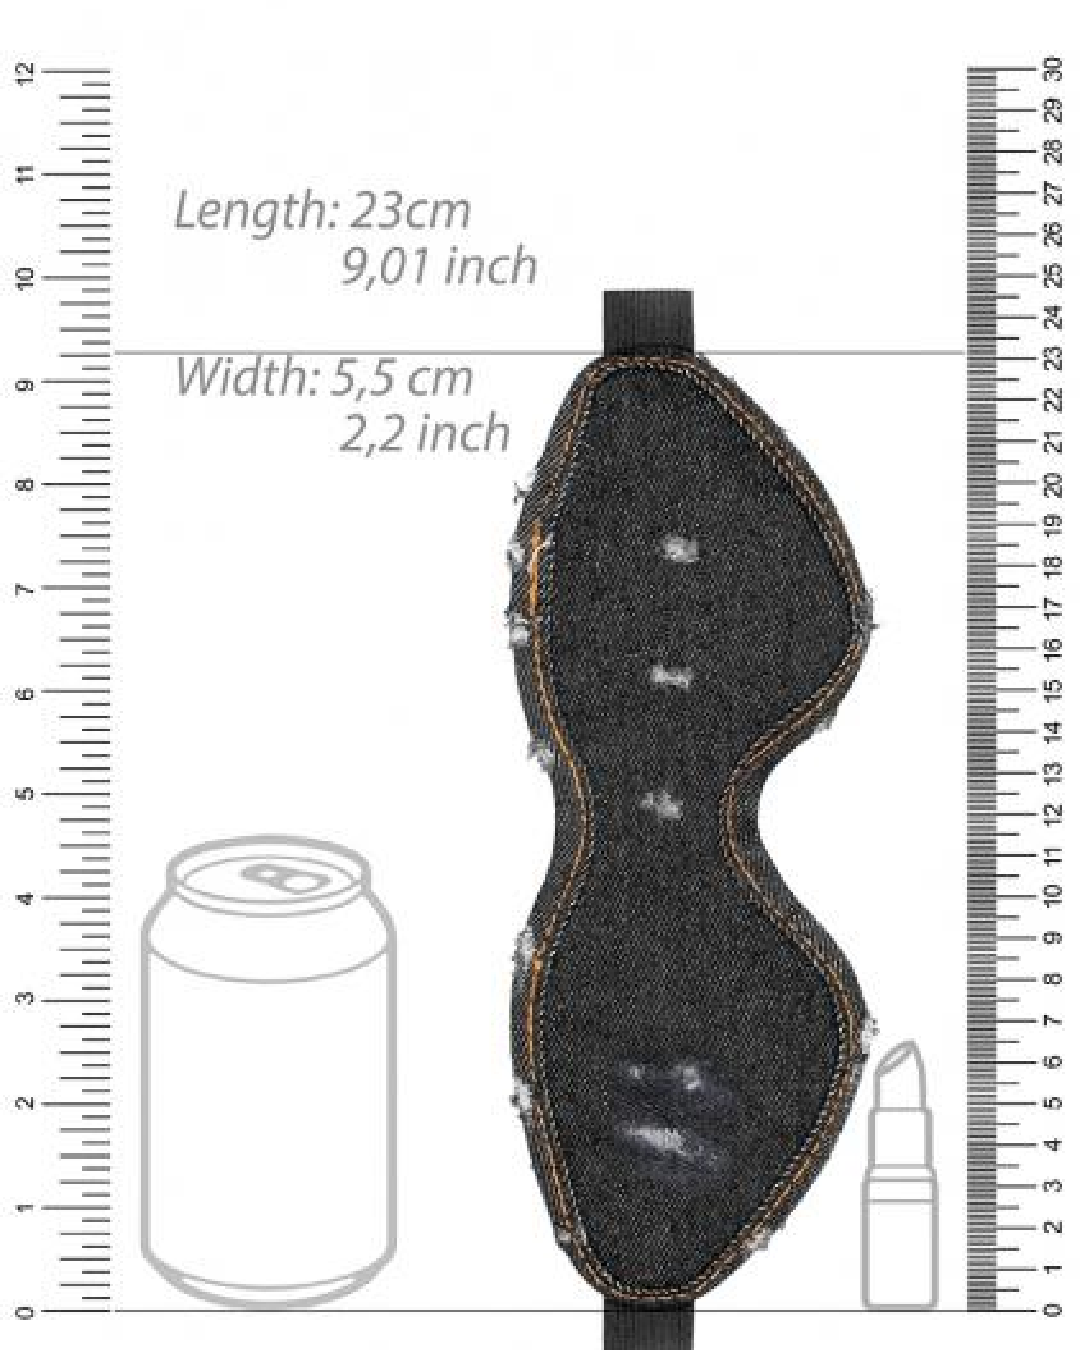 Ouch!  Denim Eye Mask - Black  graphic of product and measurements